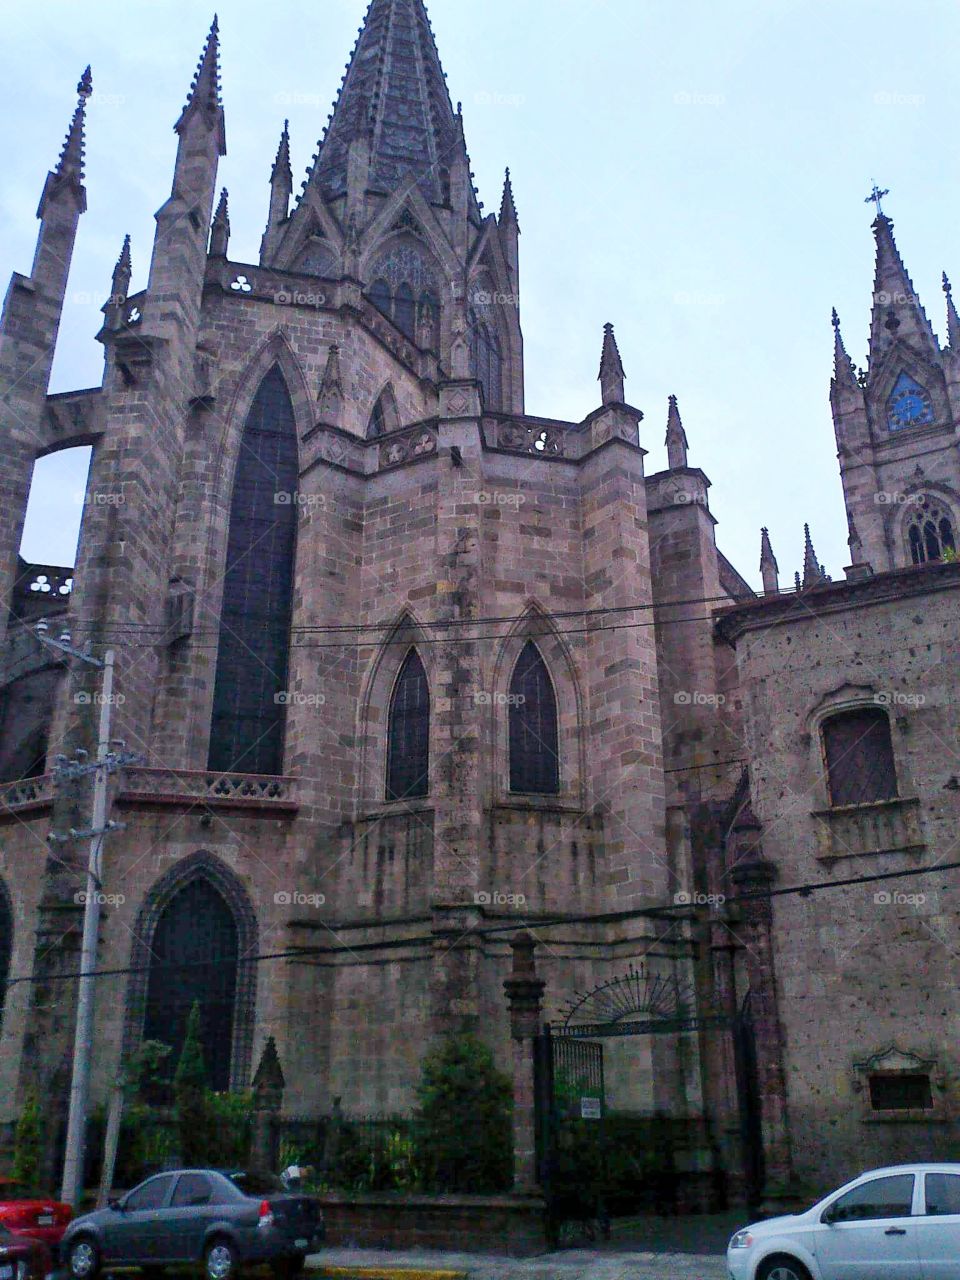 Church with gothic architecture.